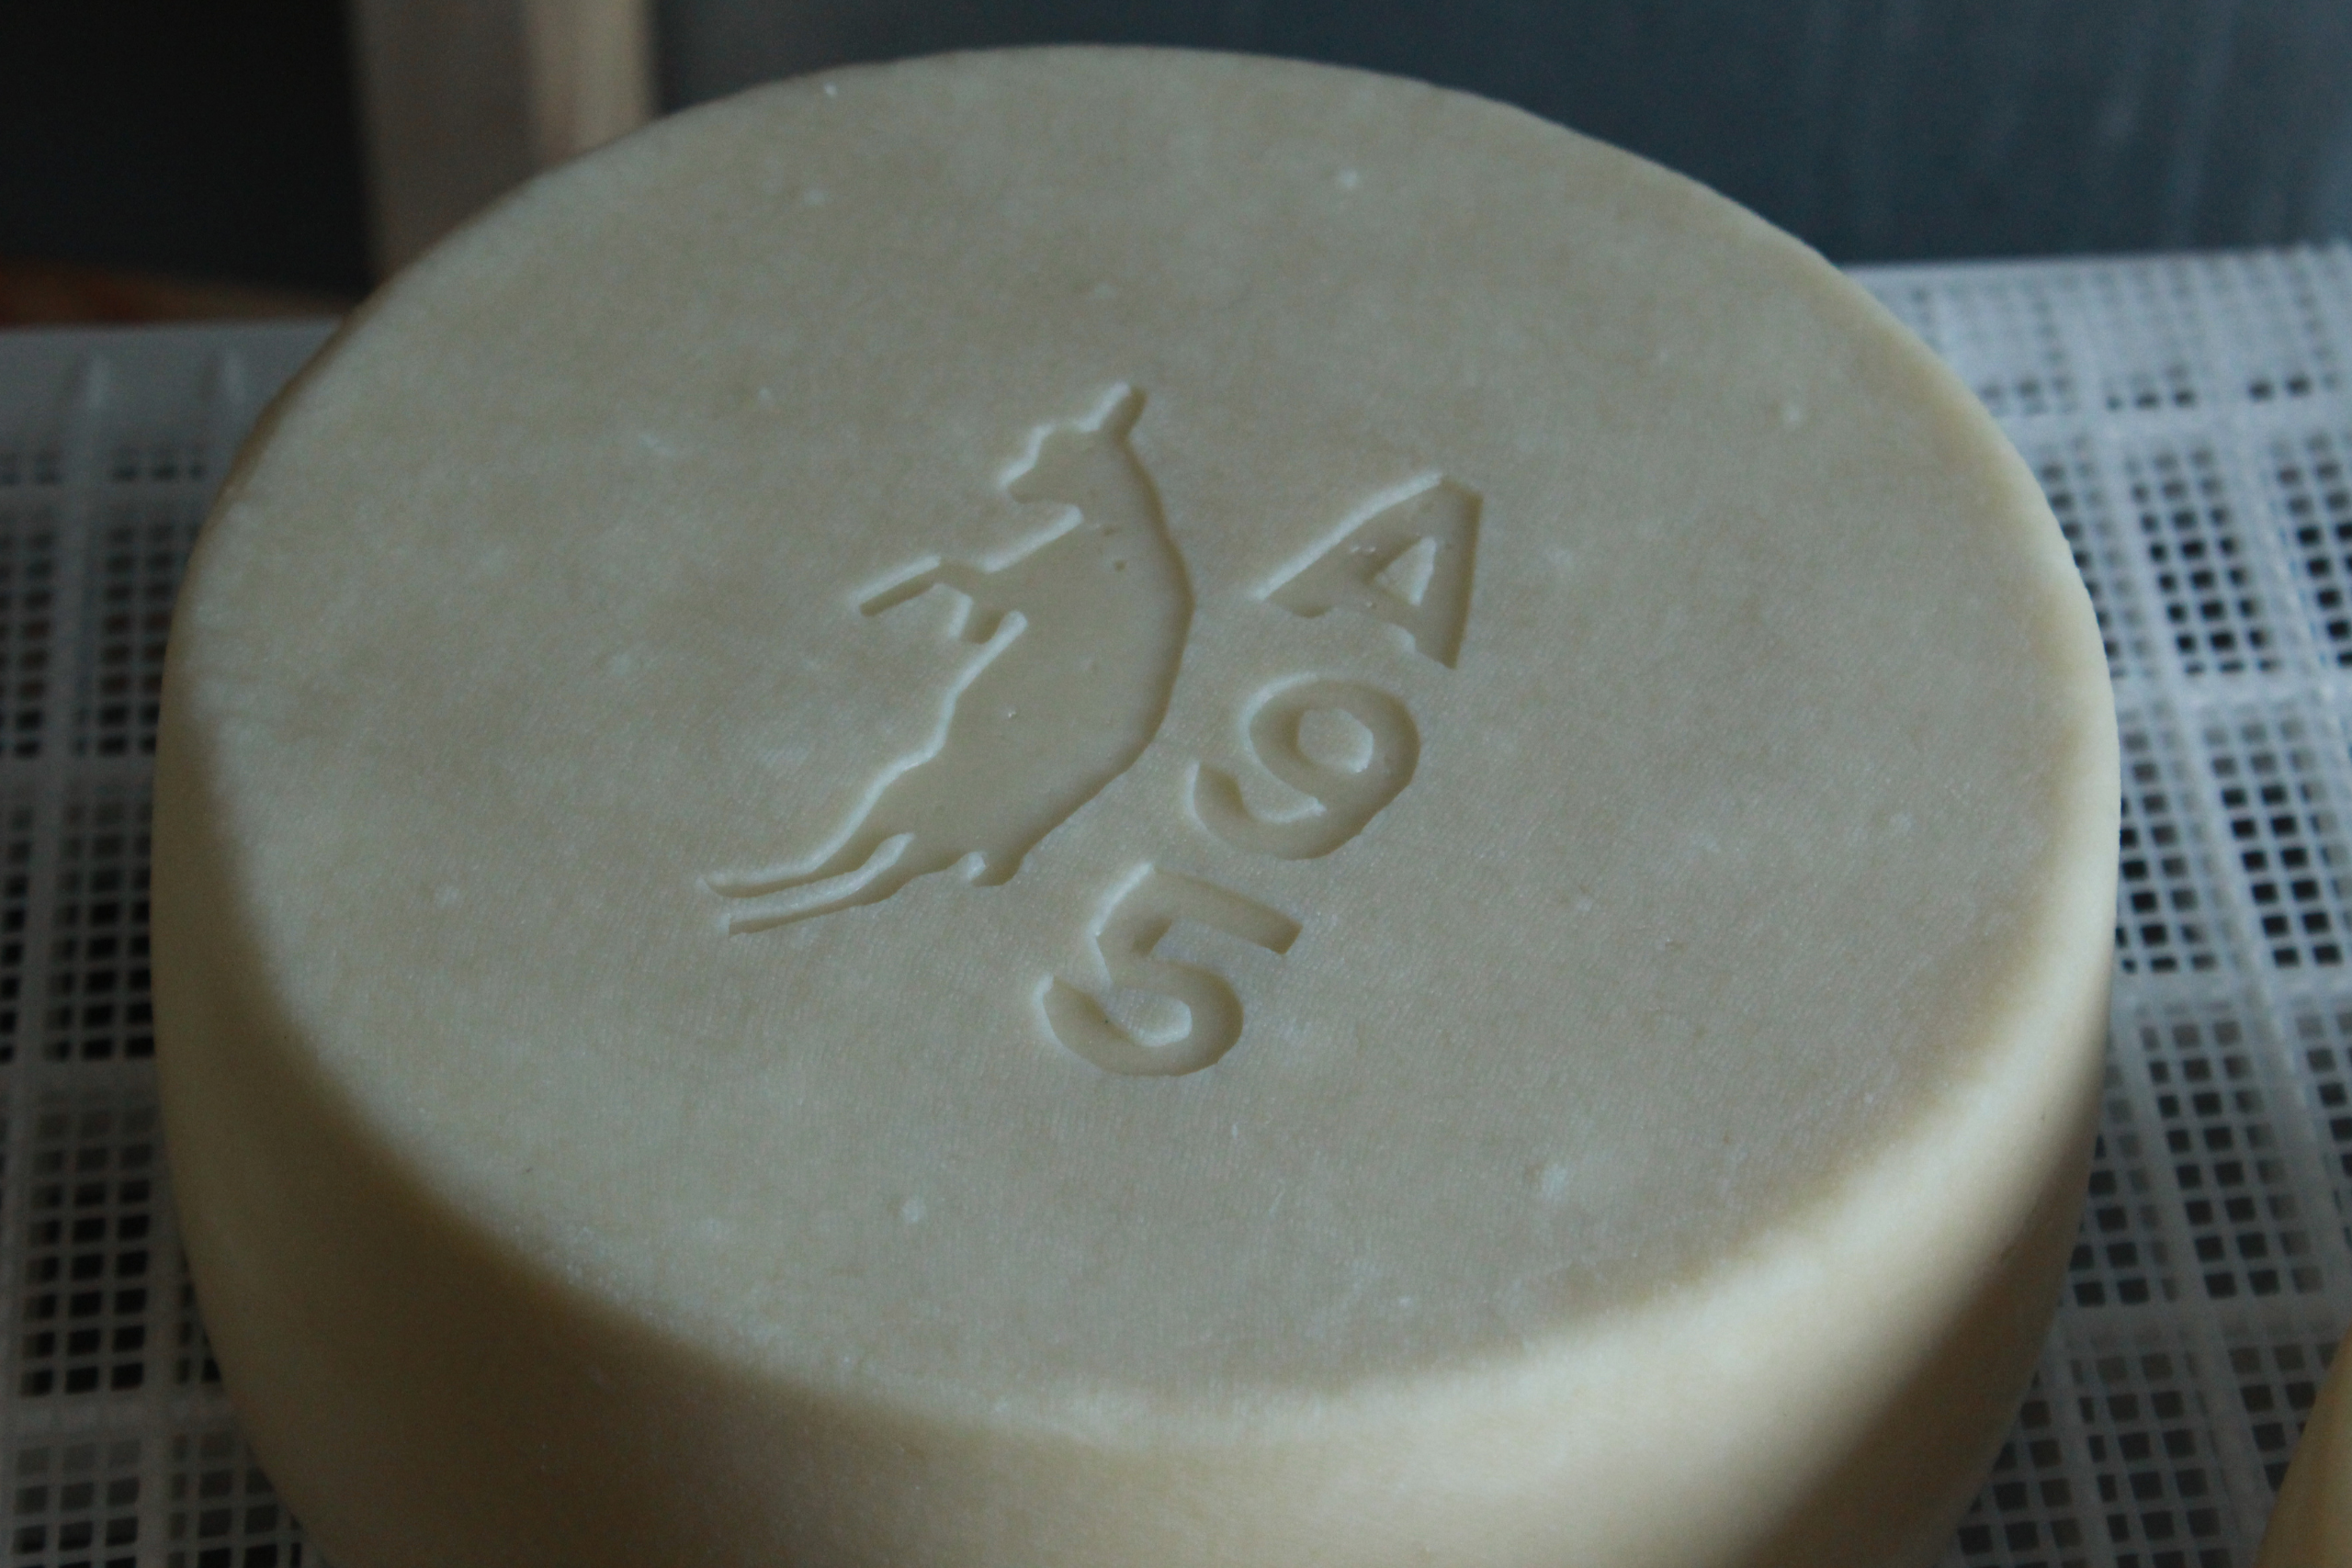 Wheel of Goat cheese stamped with a goat logo from Pumpkin Vine Family Farm in Somerville Maine